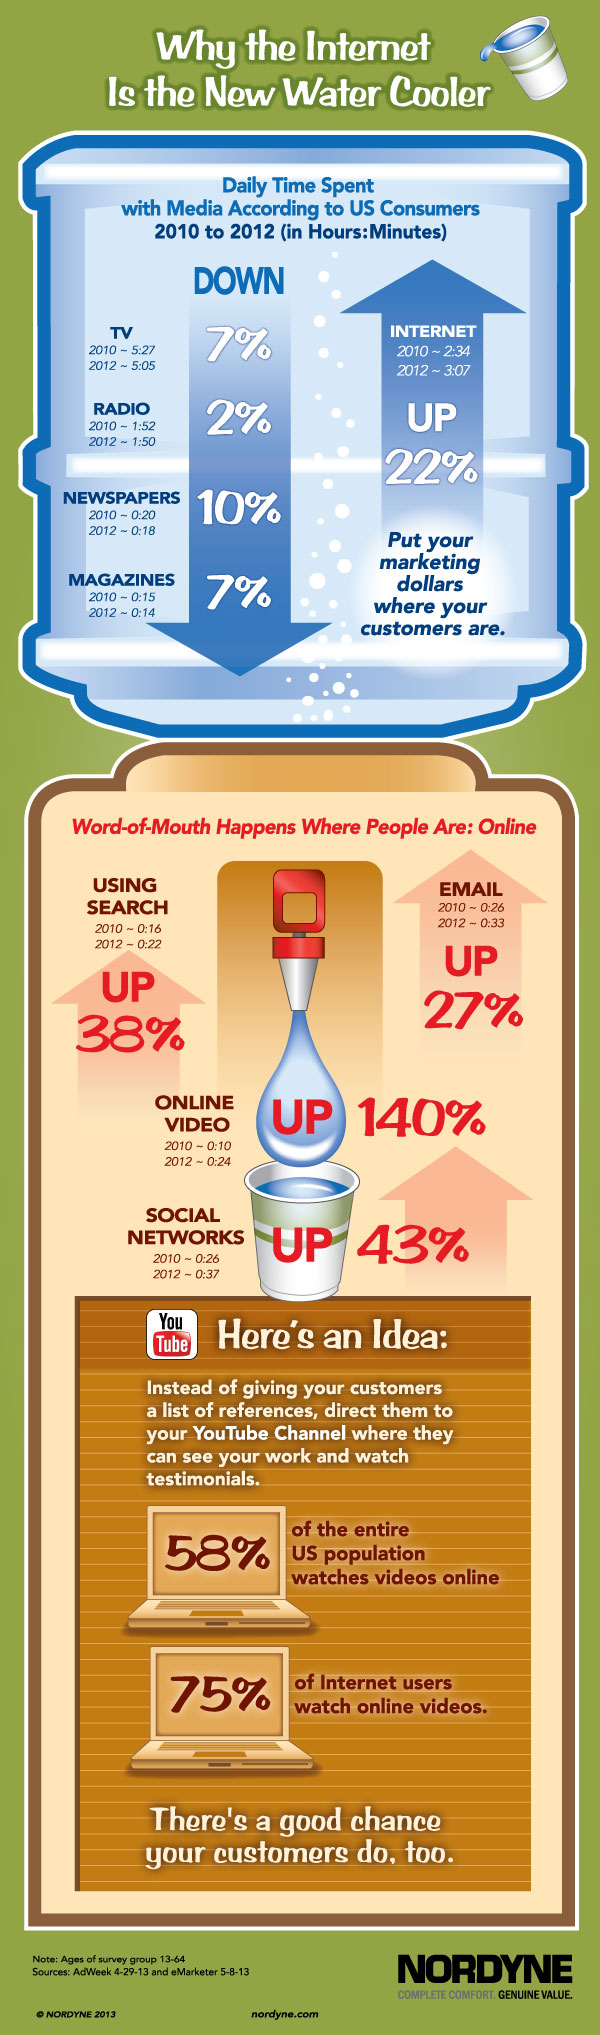 Media Usage by Consumers Infographic